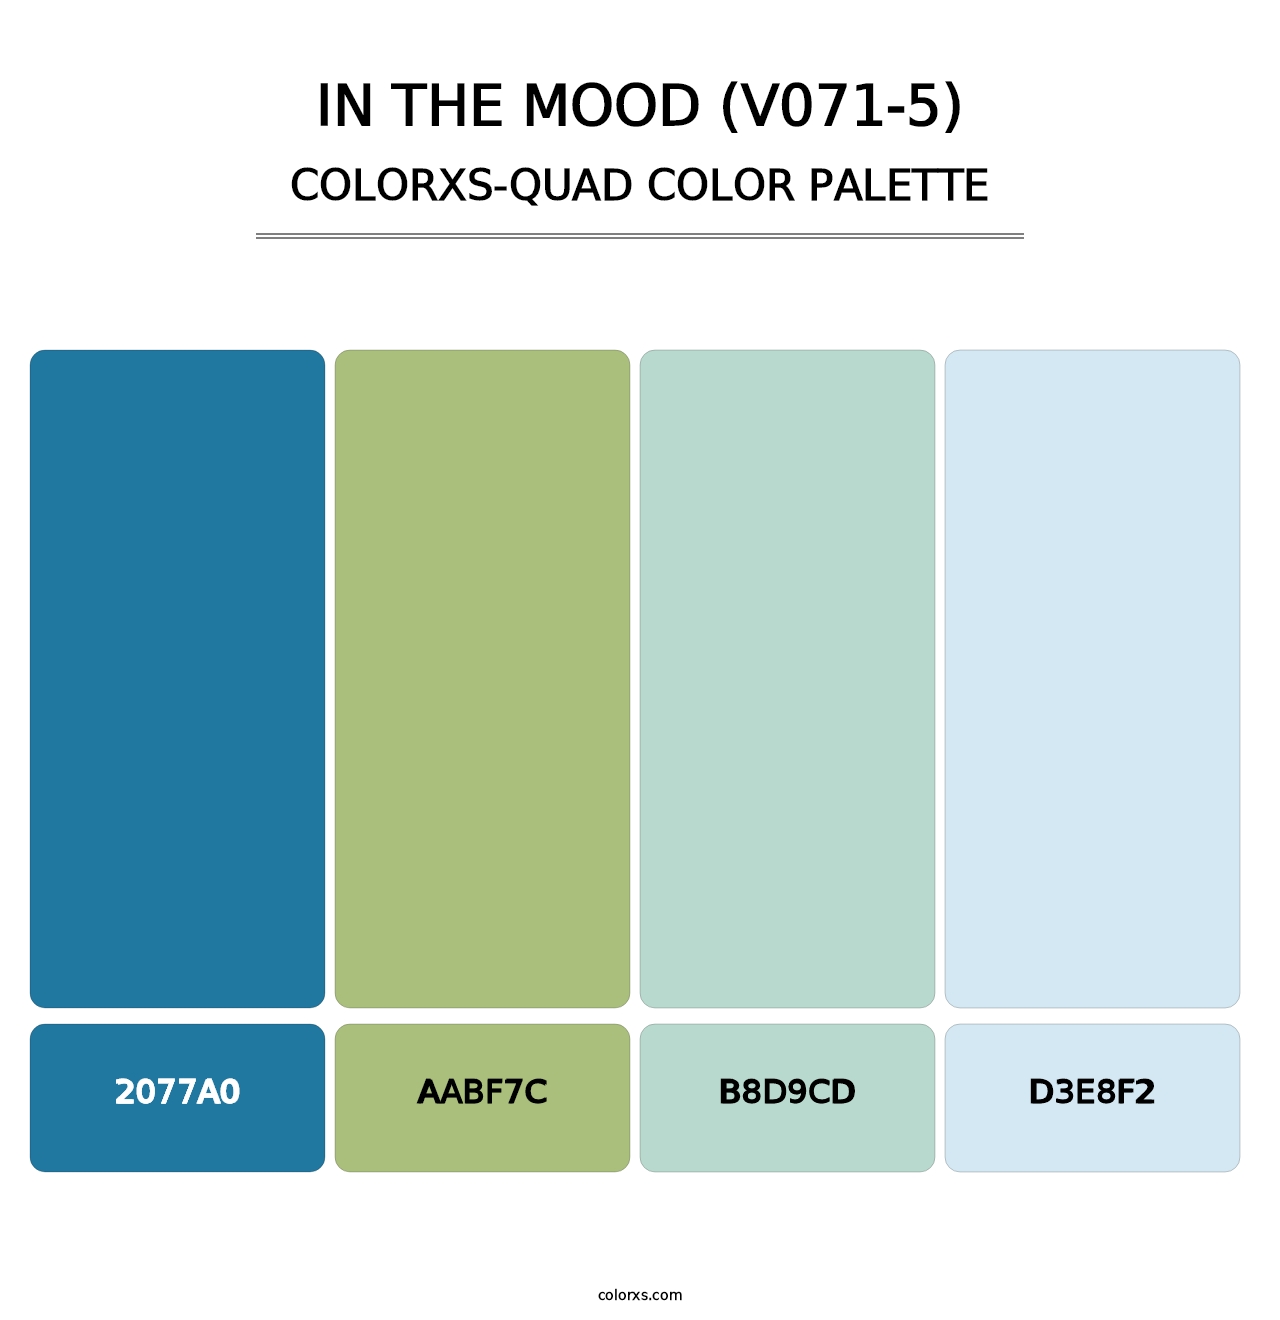 In the Mood (V071-5) - Colorxs Quad Palette